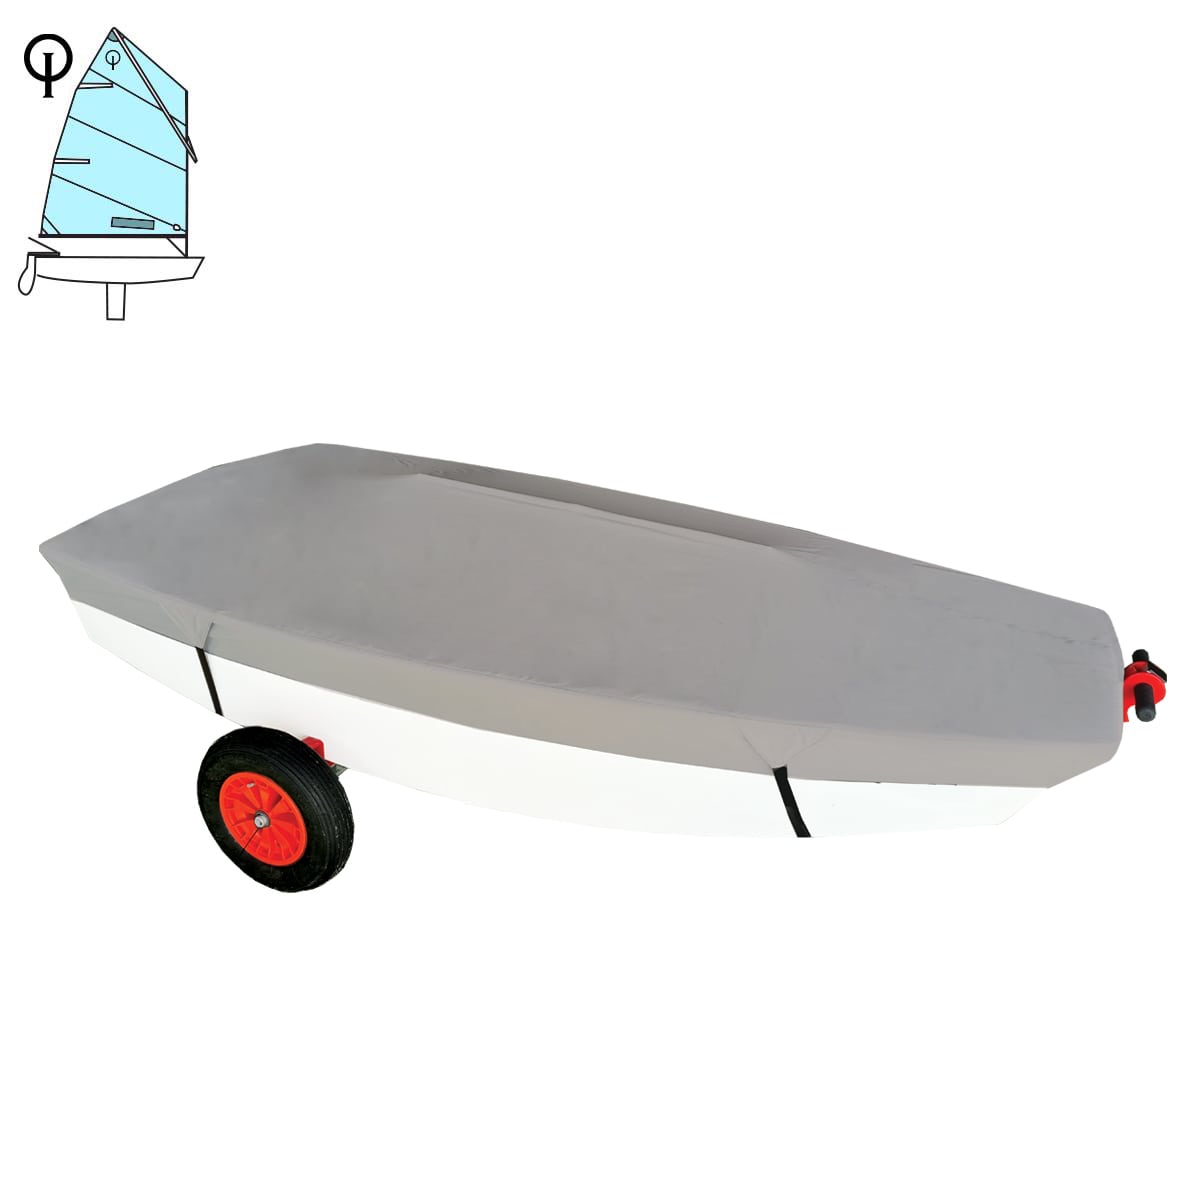 OPTIMIST Dinghy Boat Covers